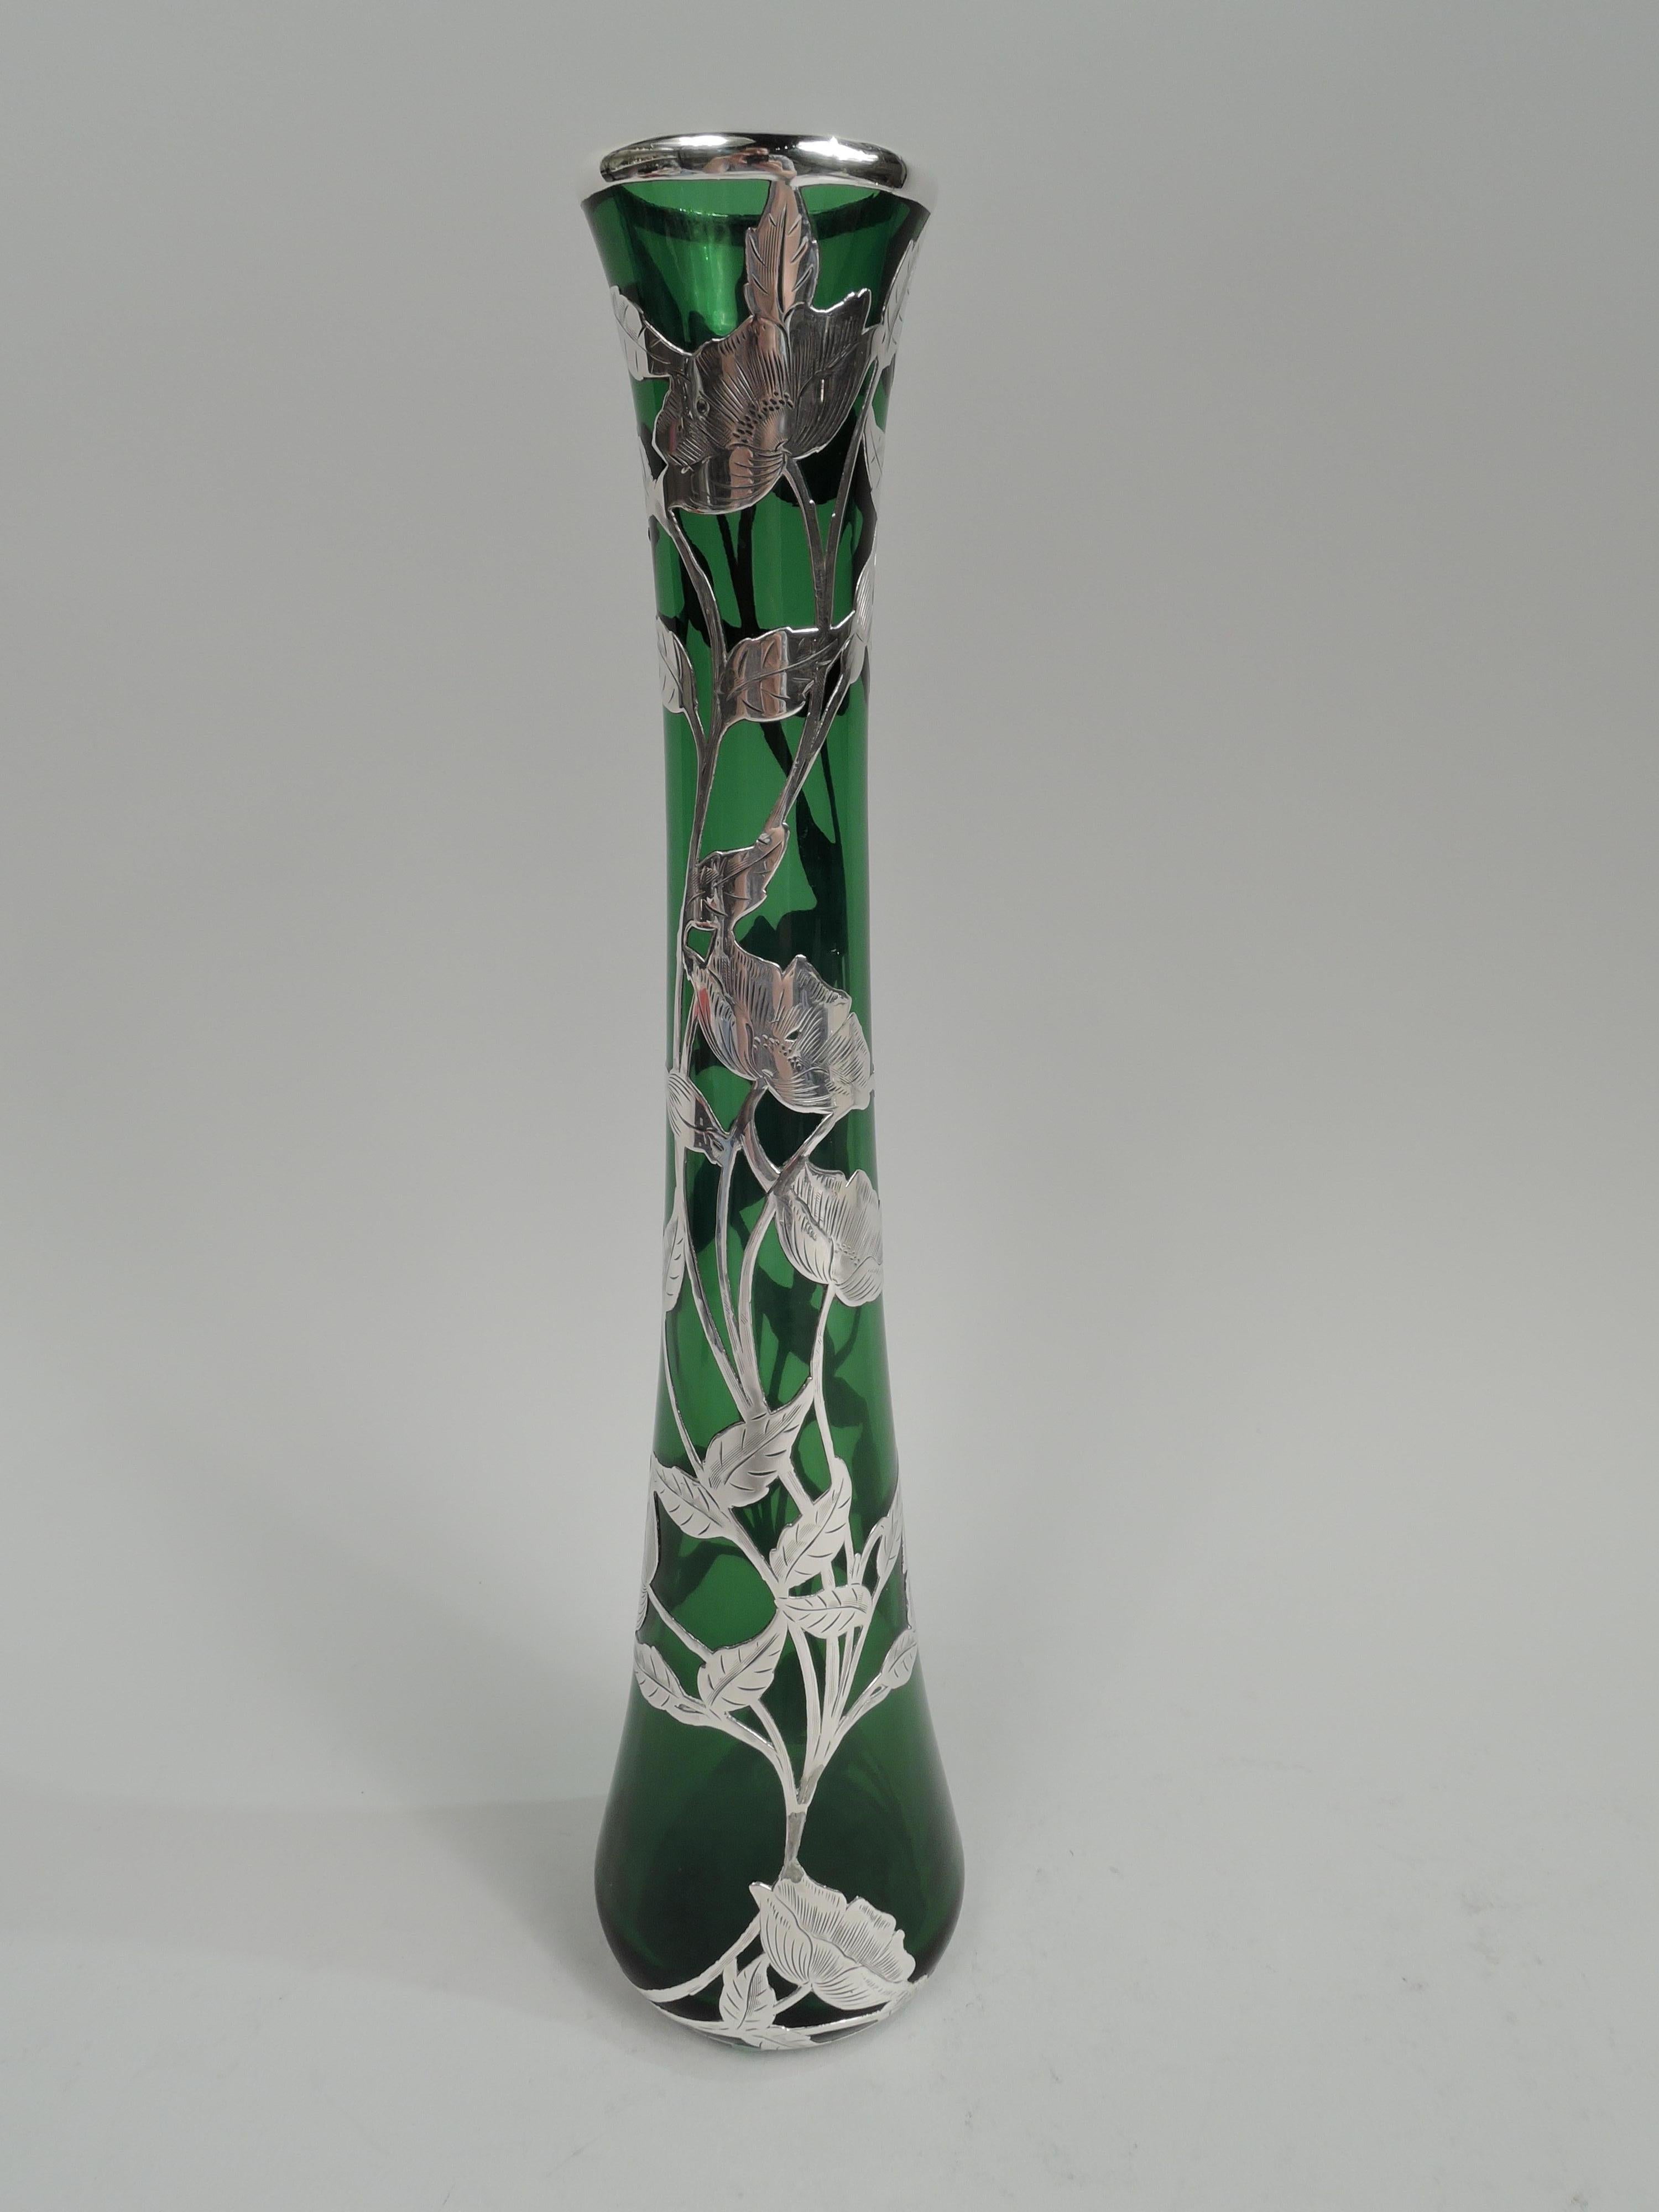 Turn-of-the-century Art Nouveau glass vase with engraved silver overlay. Made by Alvin Corp. in Providence. Conical with tall neck and gently flared rim. Overlay in form of entwined and climbing flowering and leafing branches as well as elongated